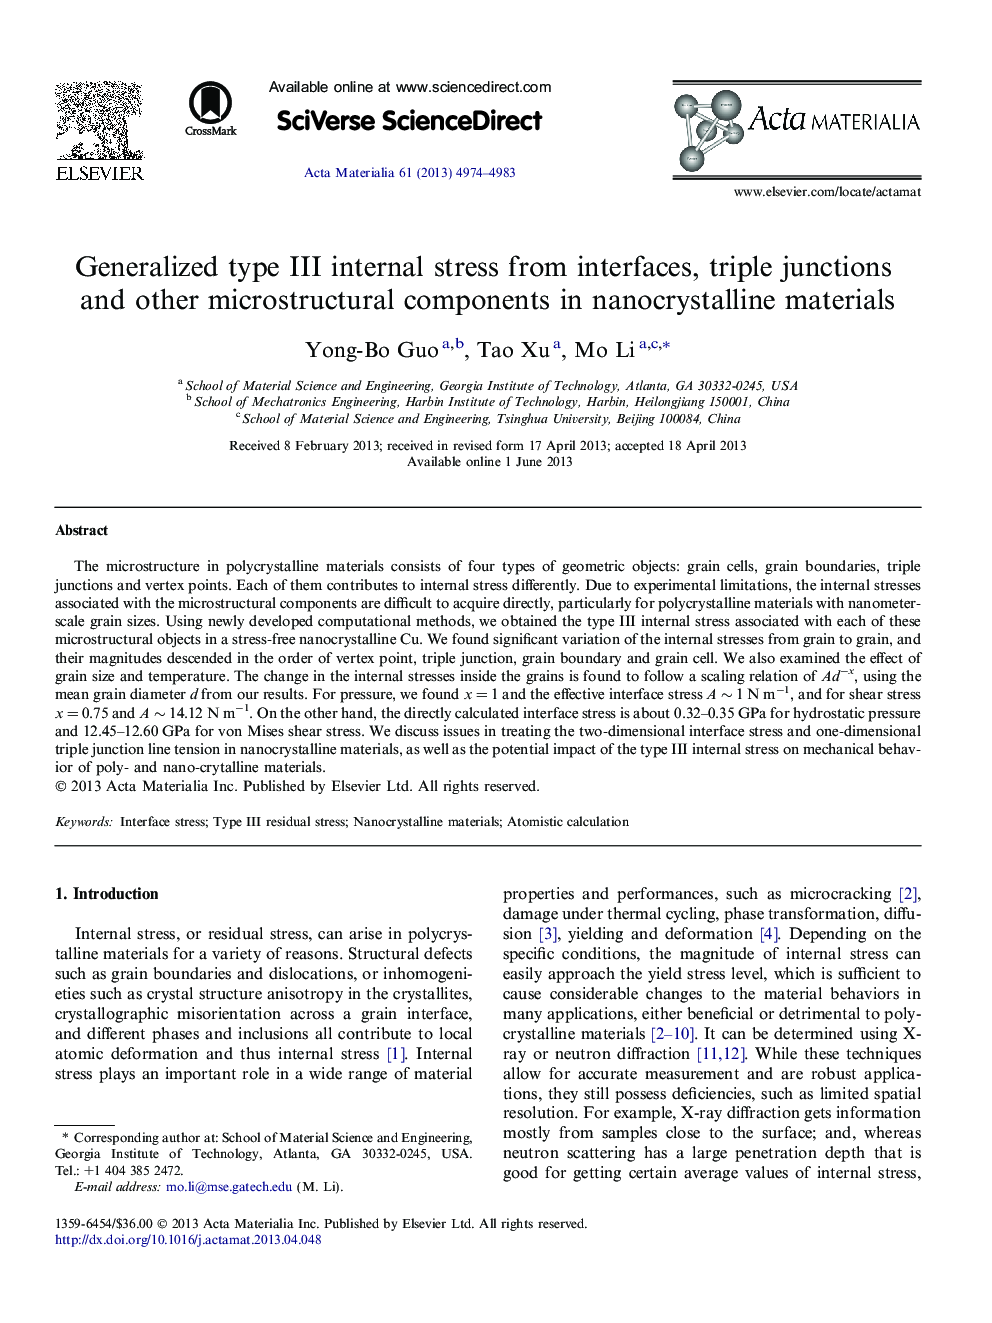 Generalized type III internal stress from interfaces, triple junctions and other microstructural components in nanocrystalline materials